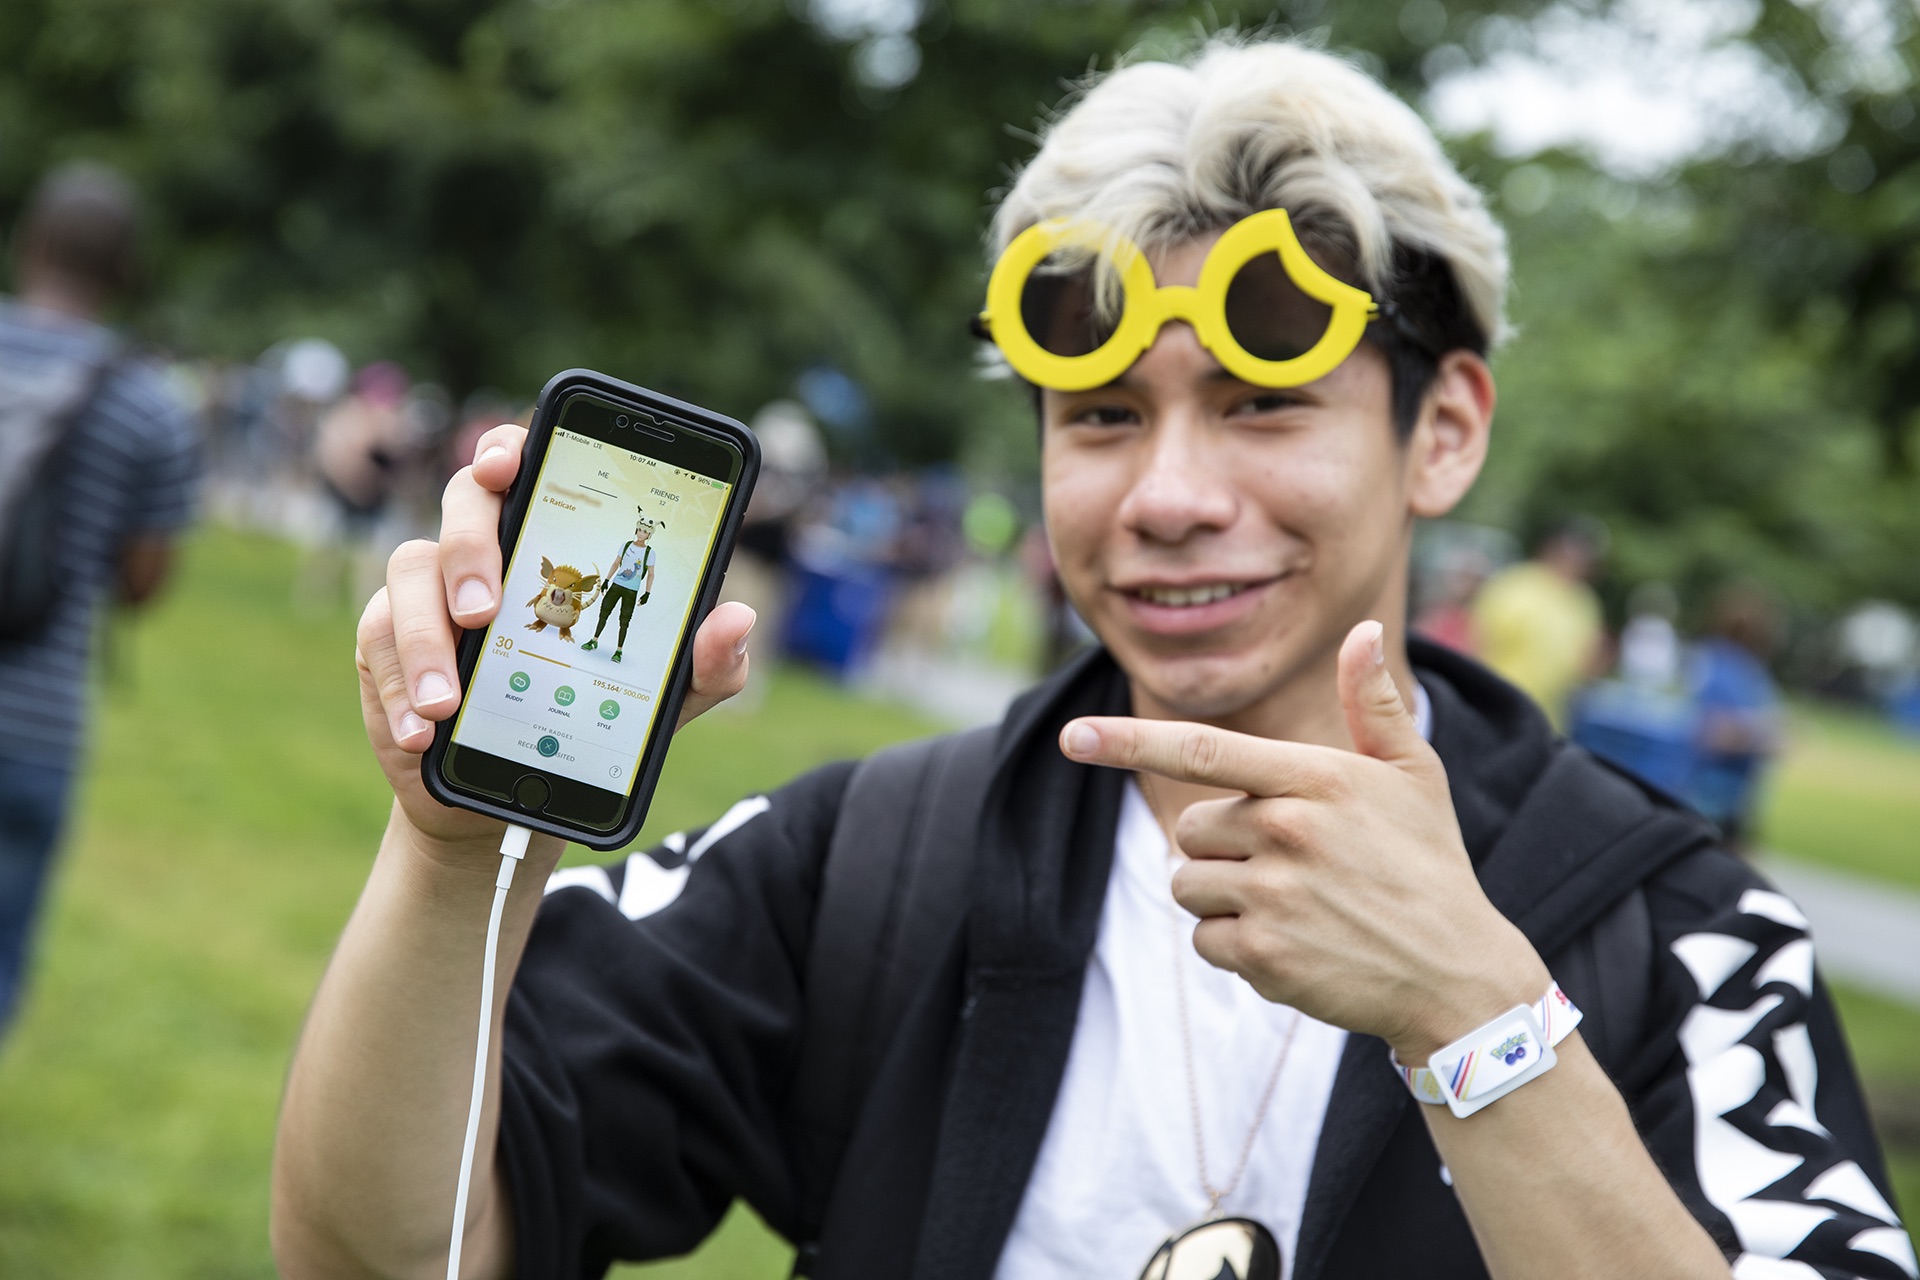 Pokémon Go players call for changes to Daily Incense, feeling disheartened  - Video Games on Sports Illustrated